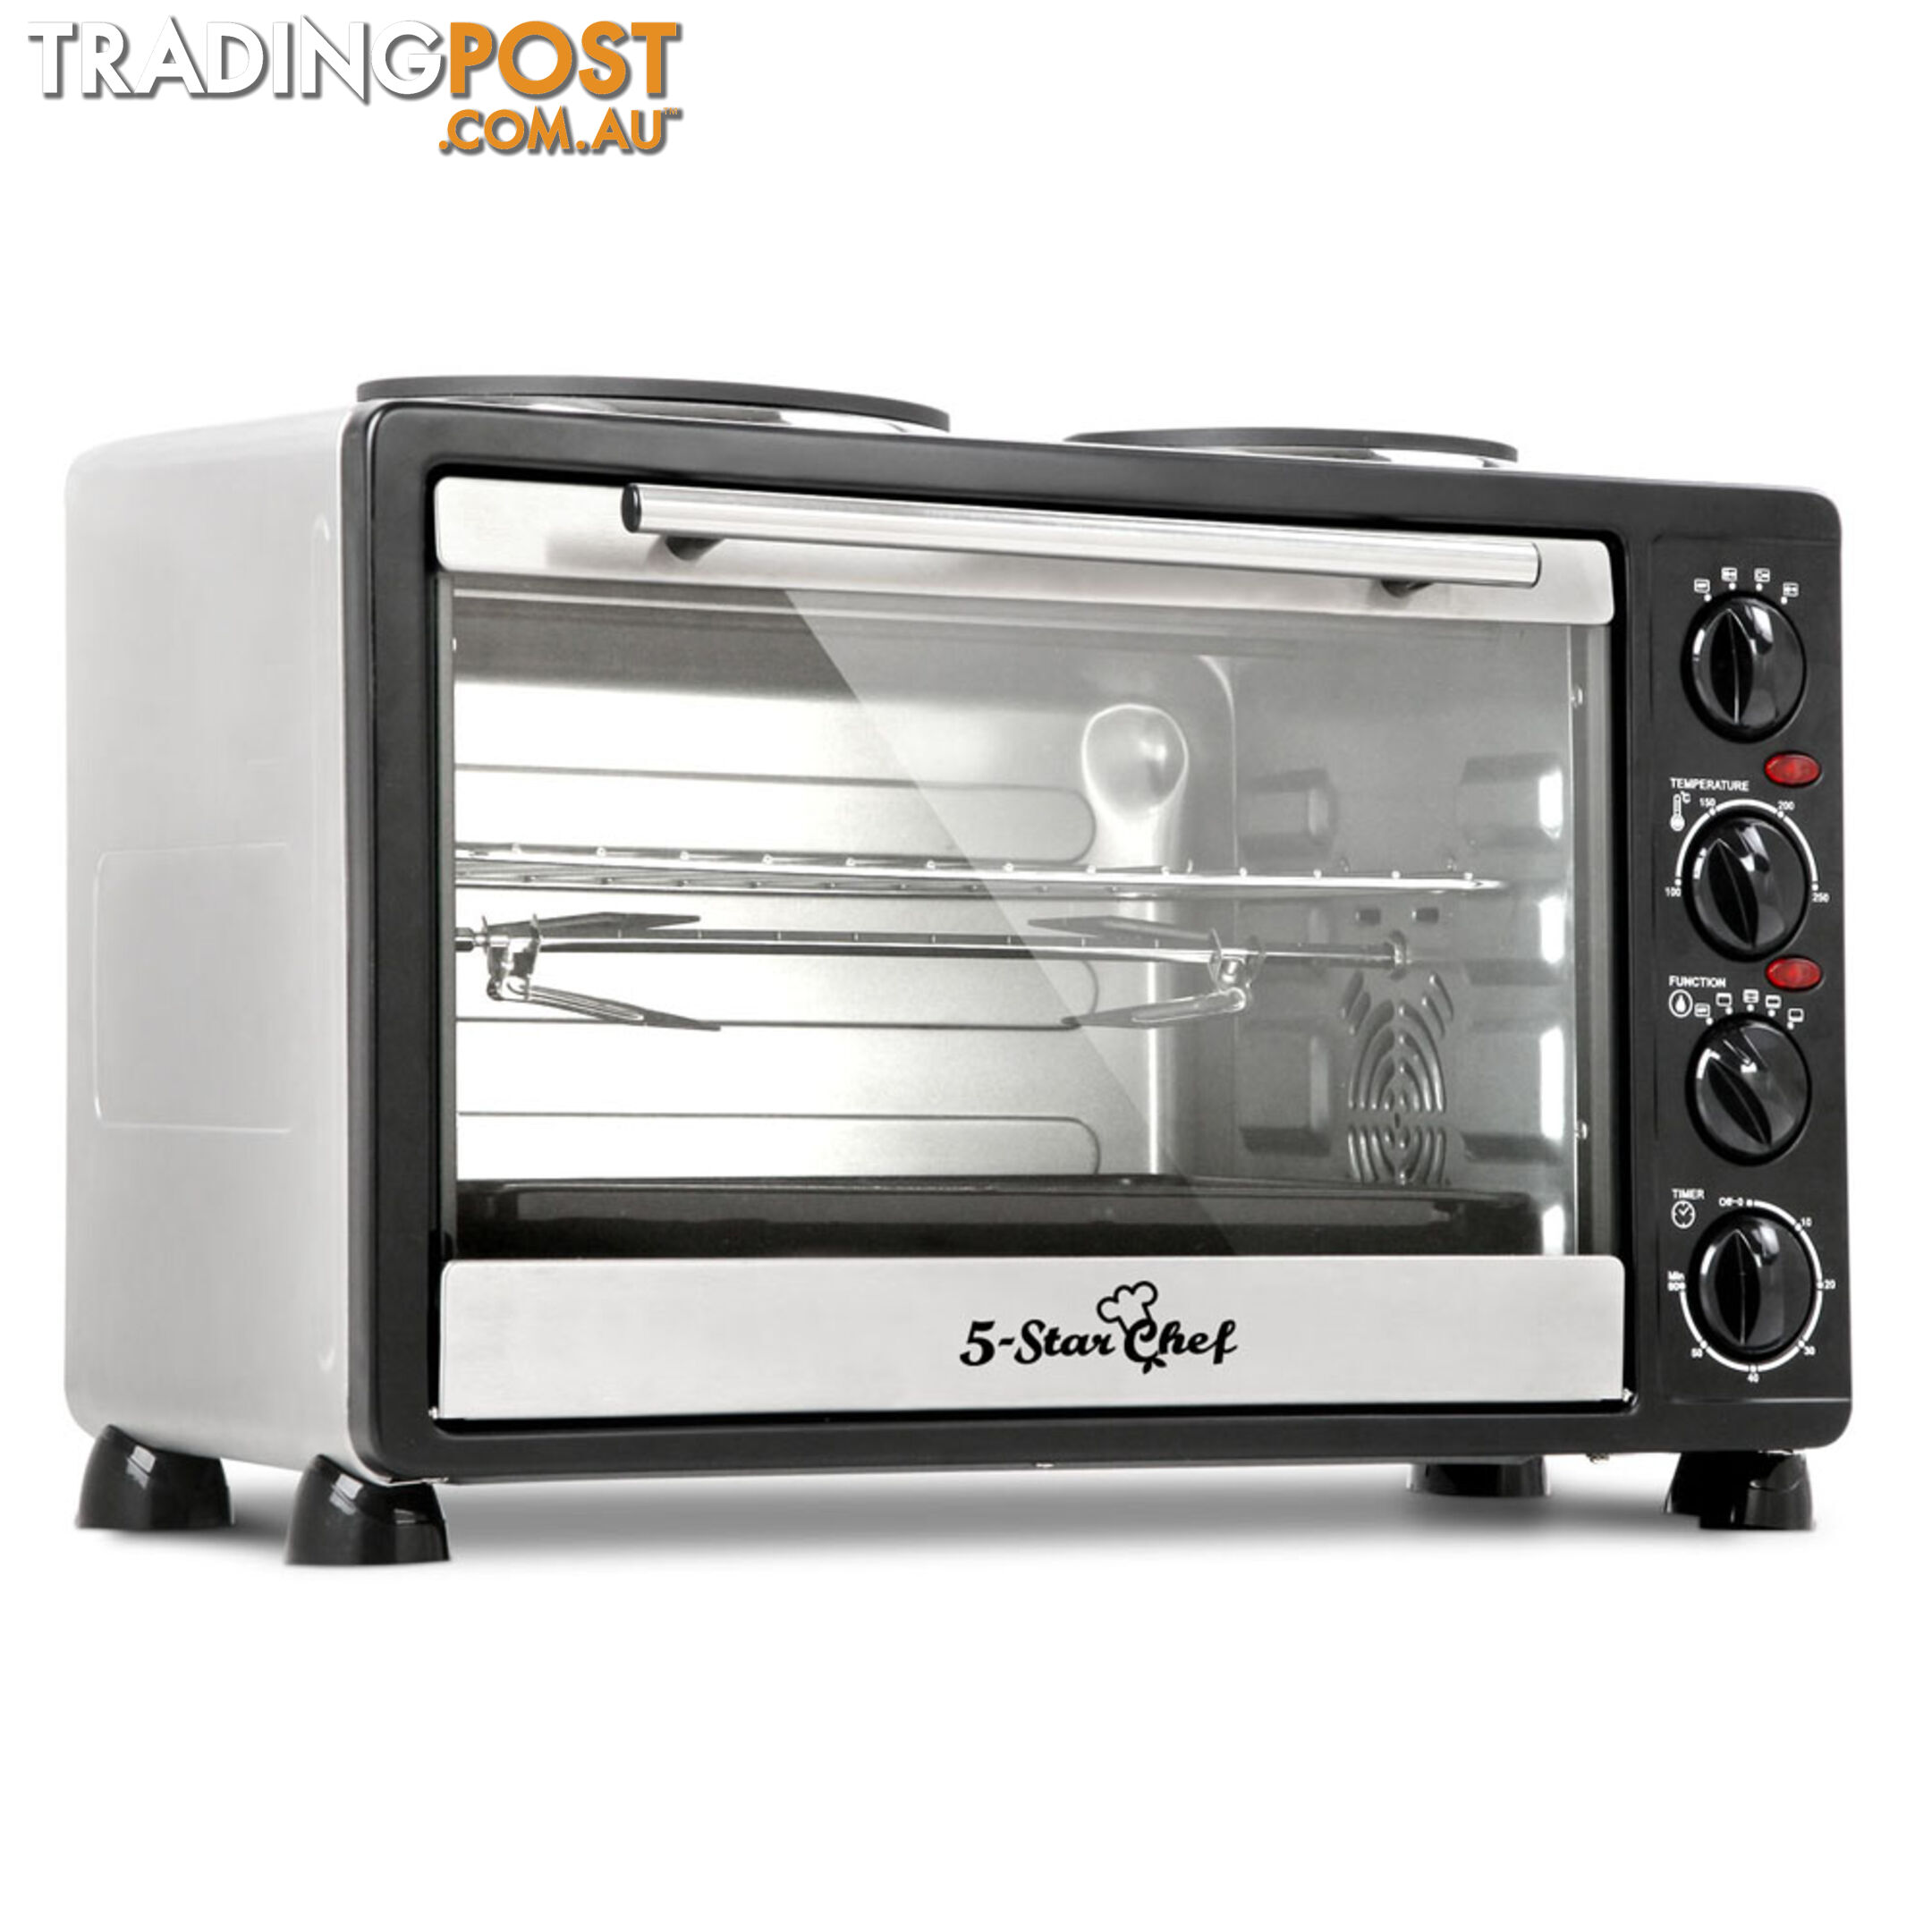 34L Benchtop Convection Oven with Twin Hot Plate